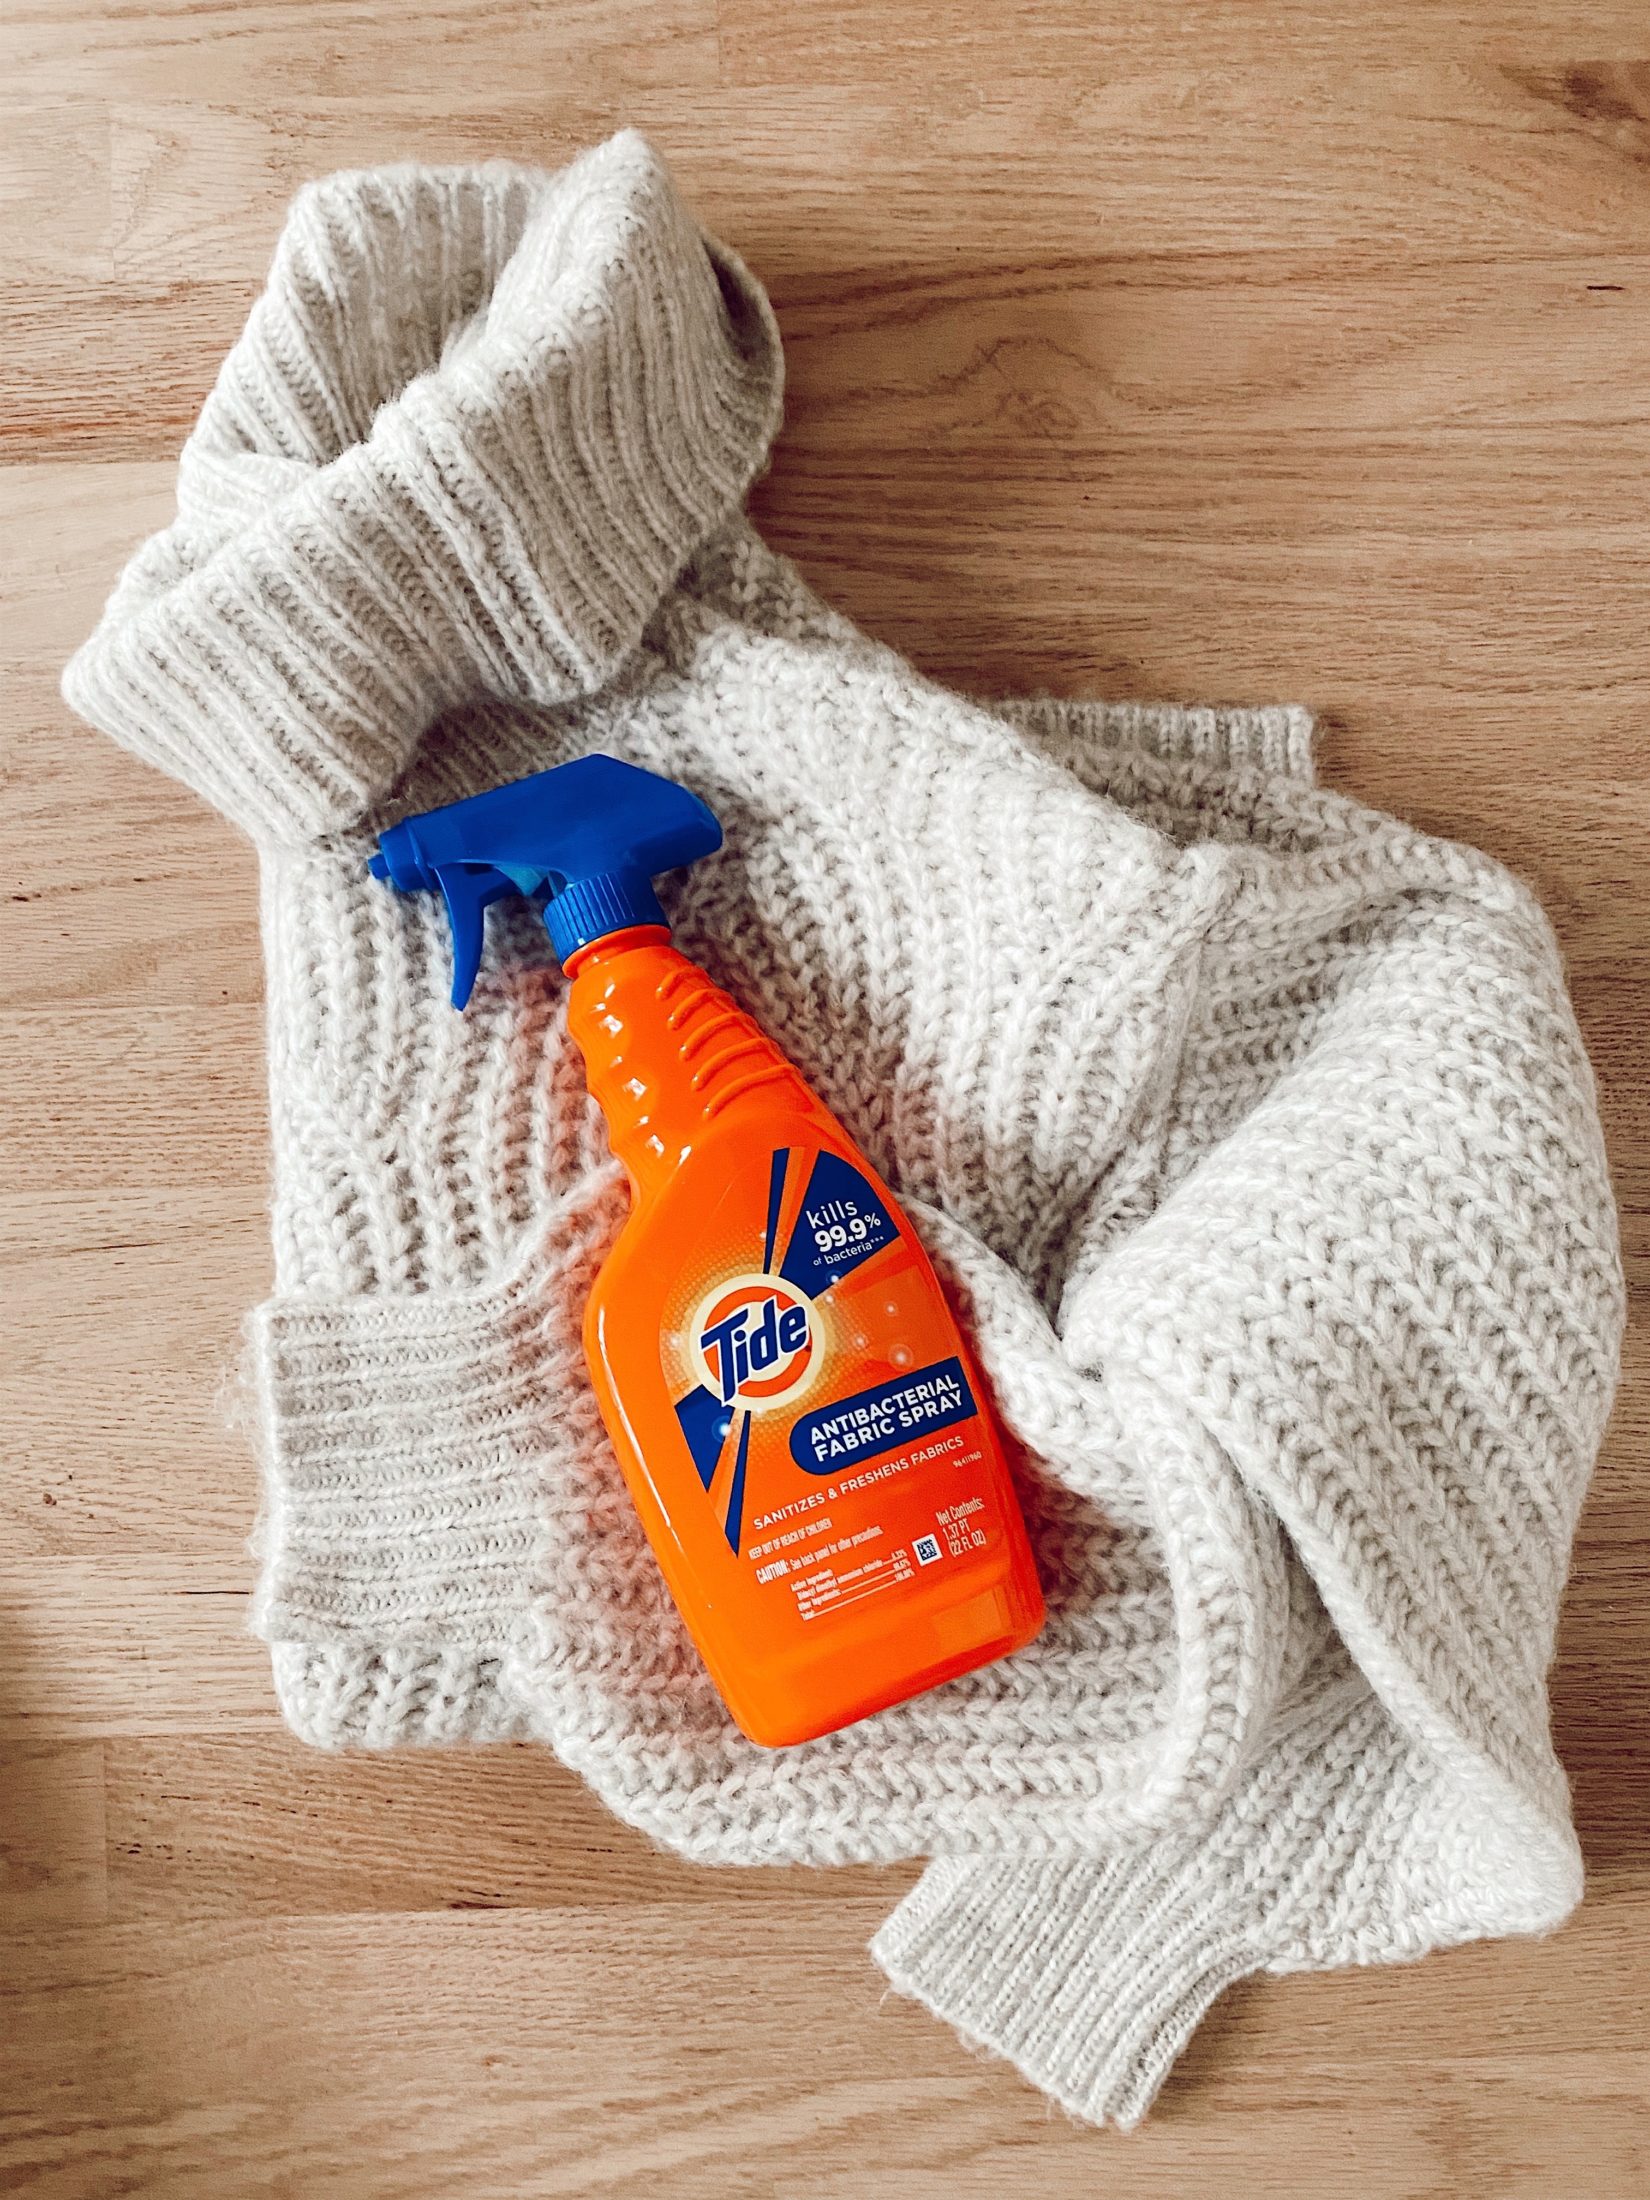 how to keep clothes fresh with tide antibacterial spray